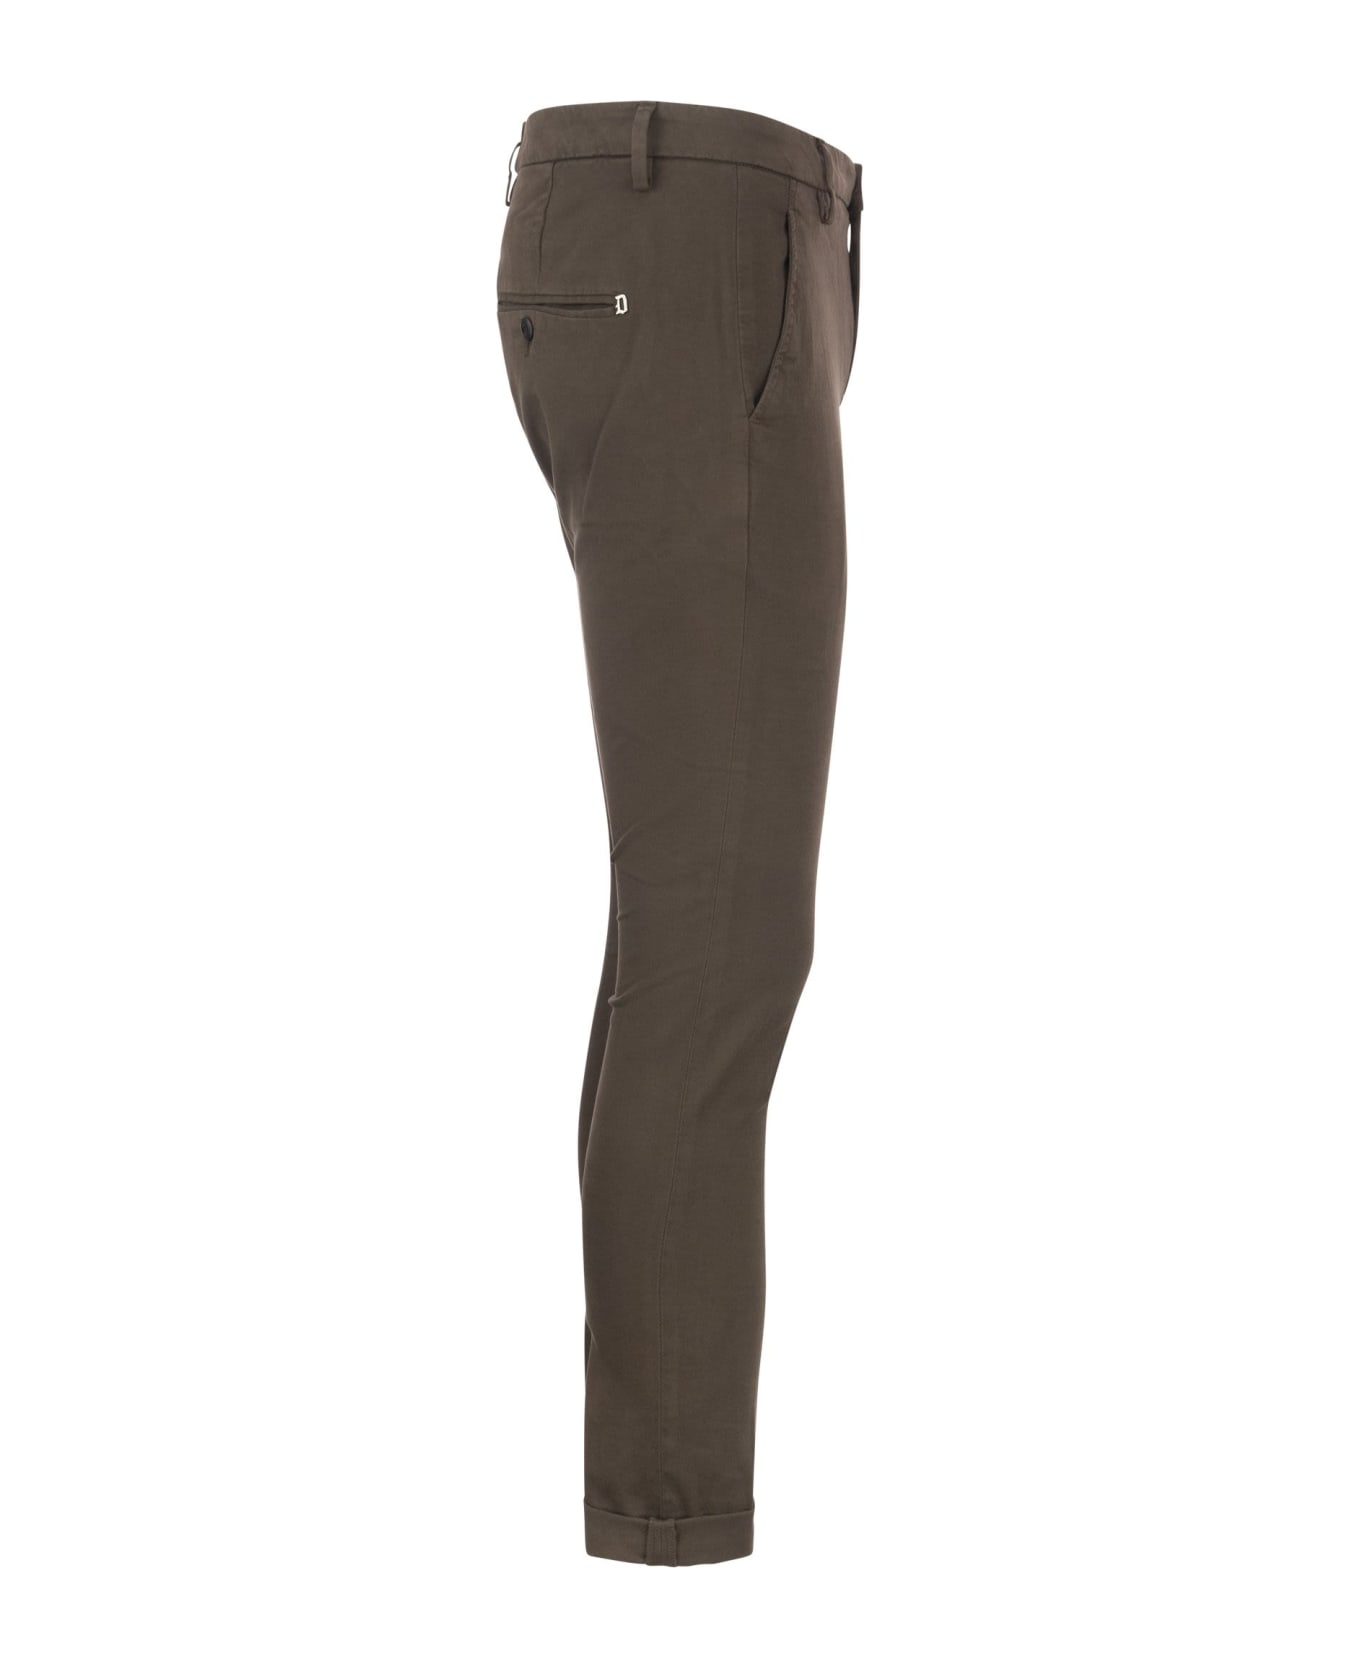 Dondup Gaubert Brown Trousers Instretch Cotton - Brown ボトムス